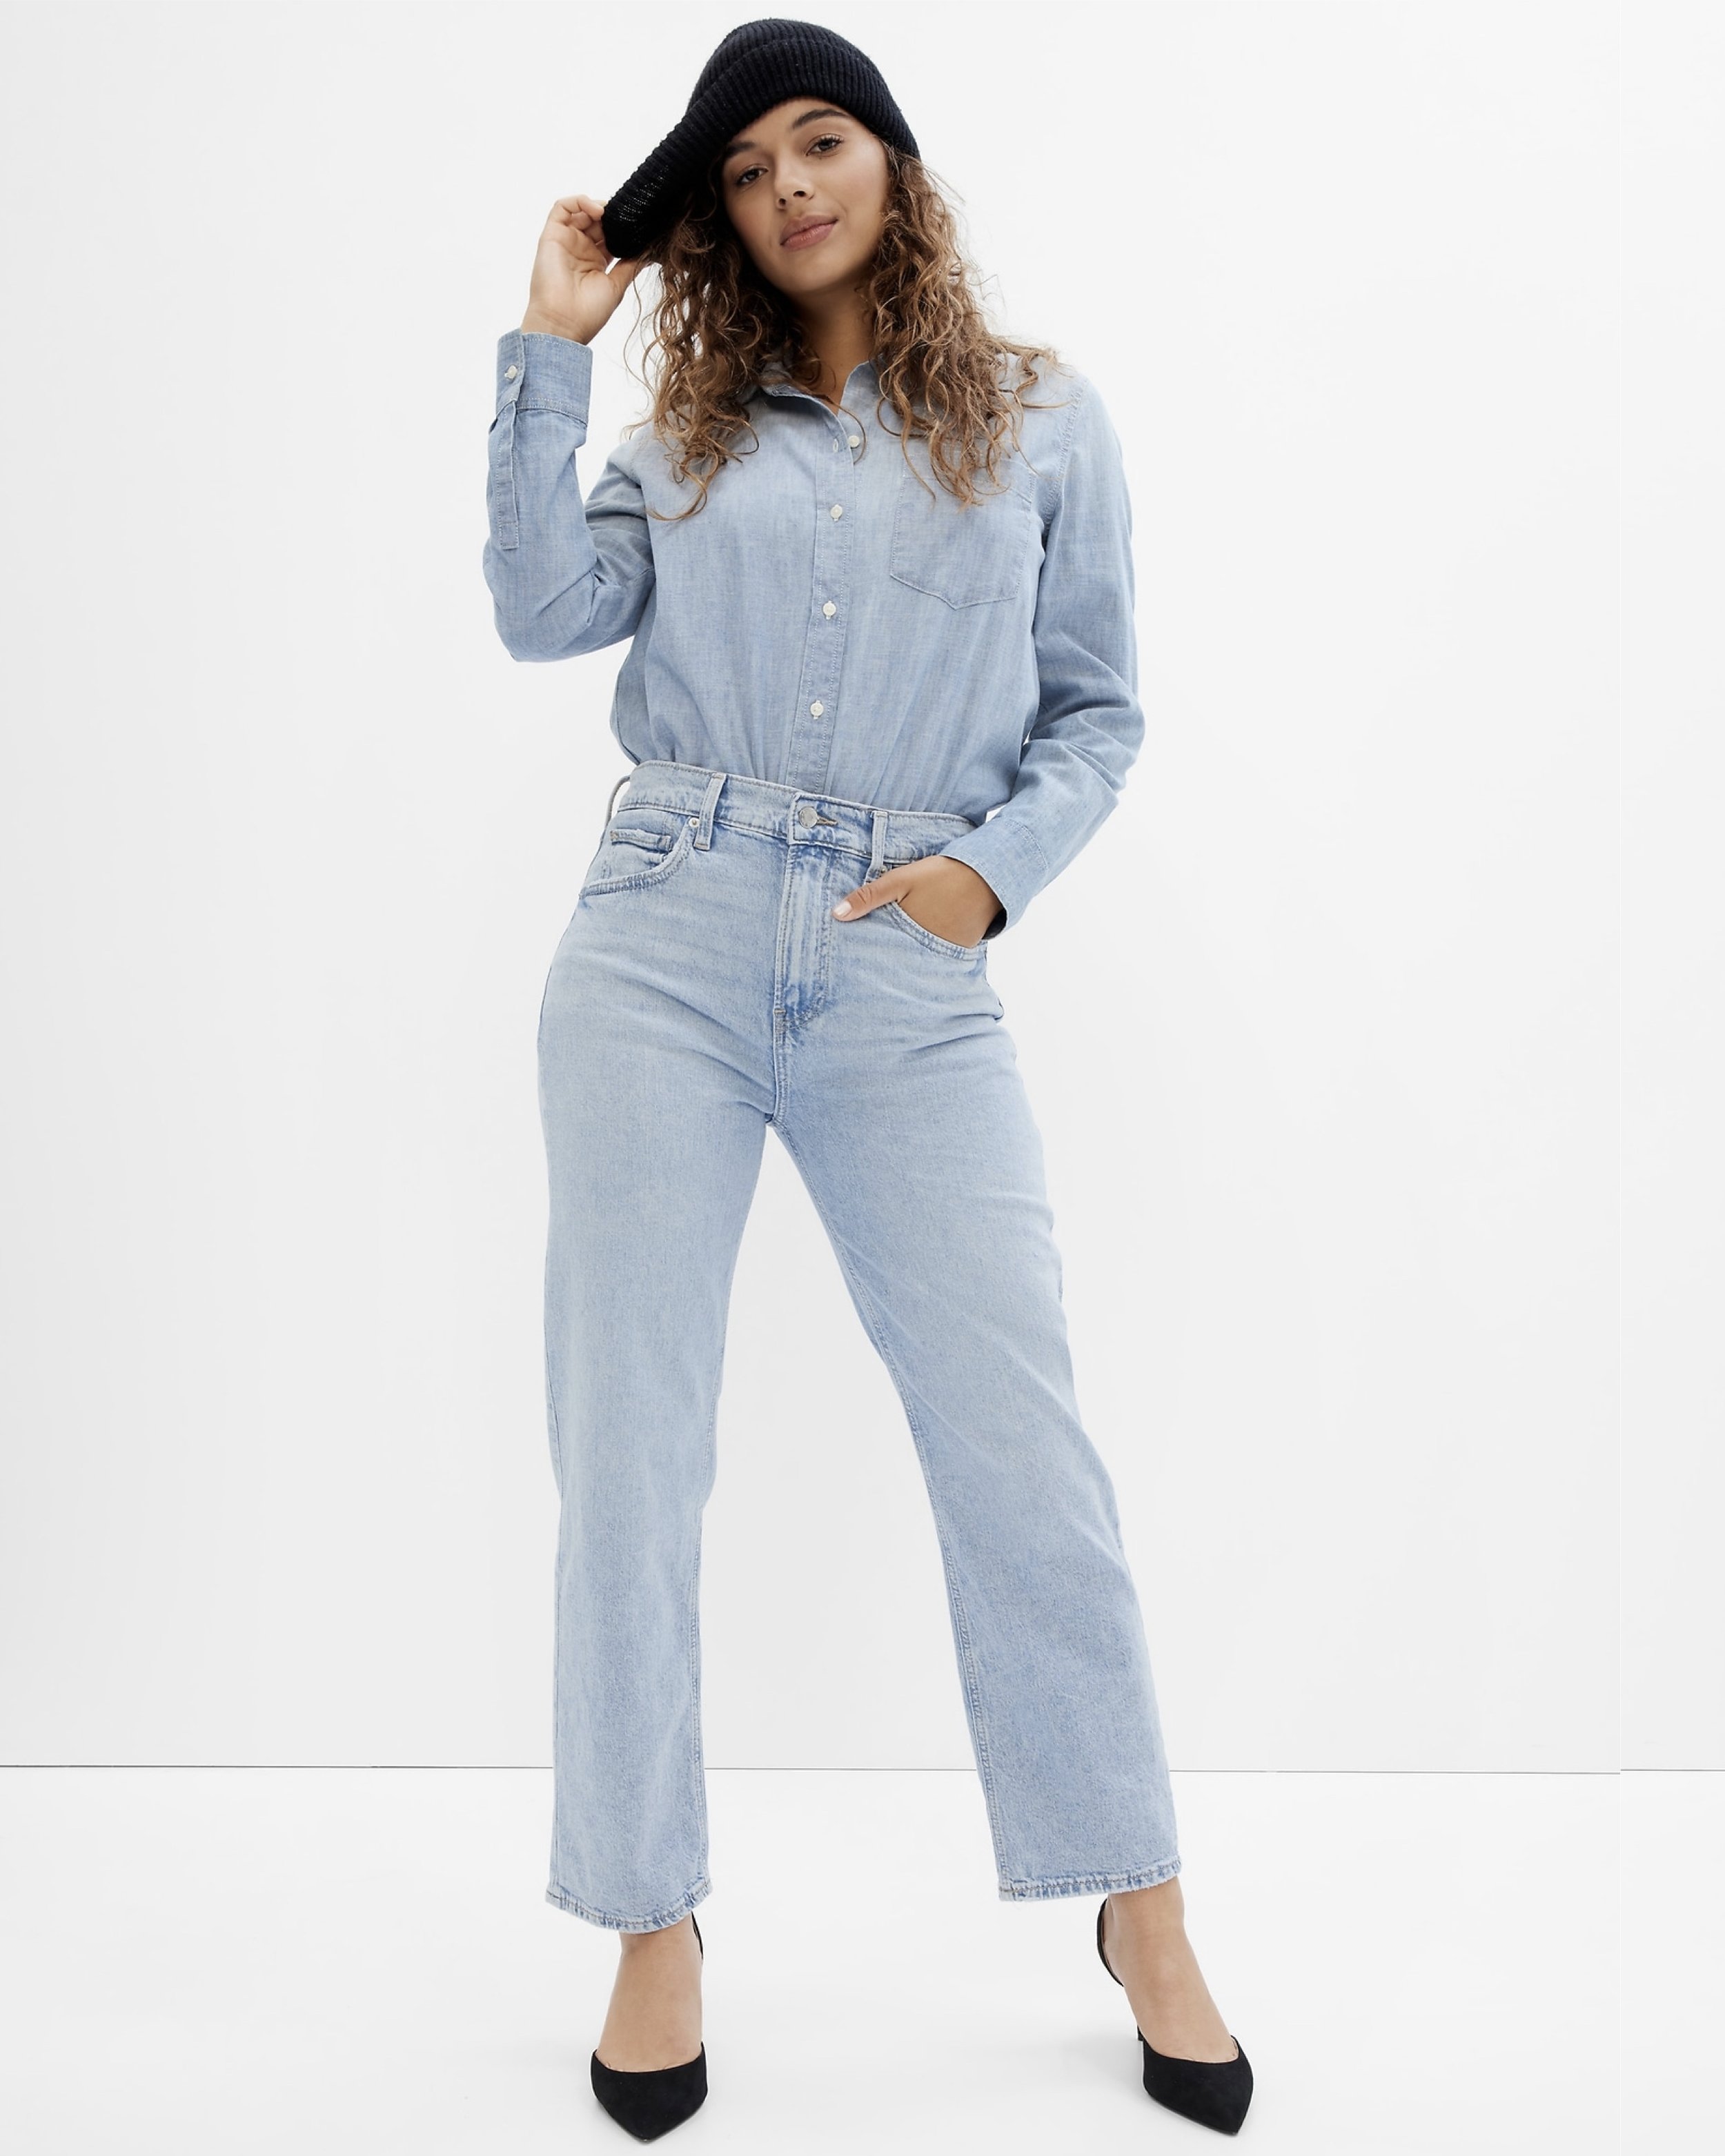 Women_s High Rise _90s Loose Jeans with Washwell 3650.jpeg